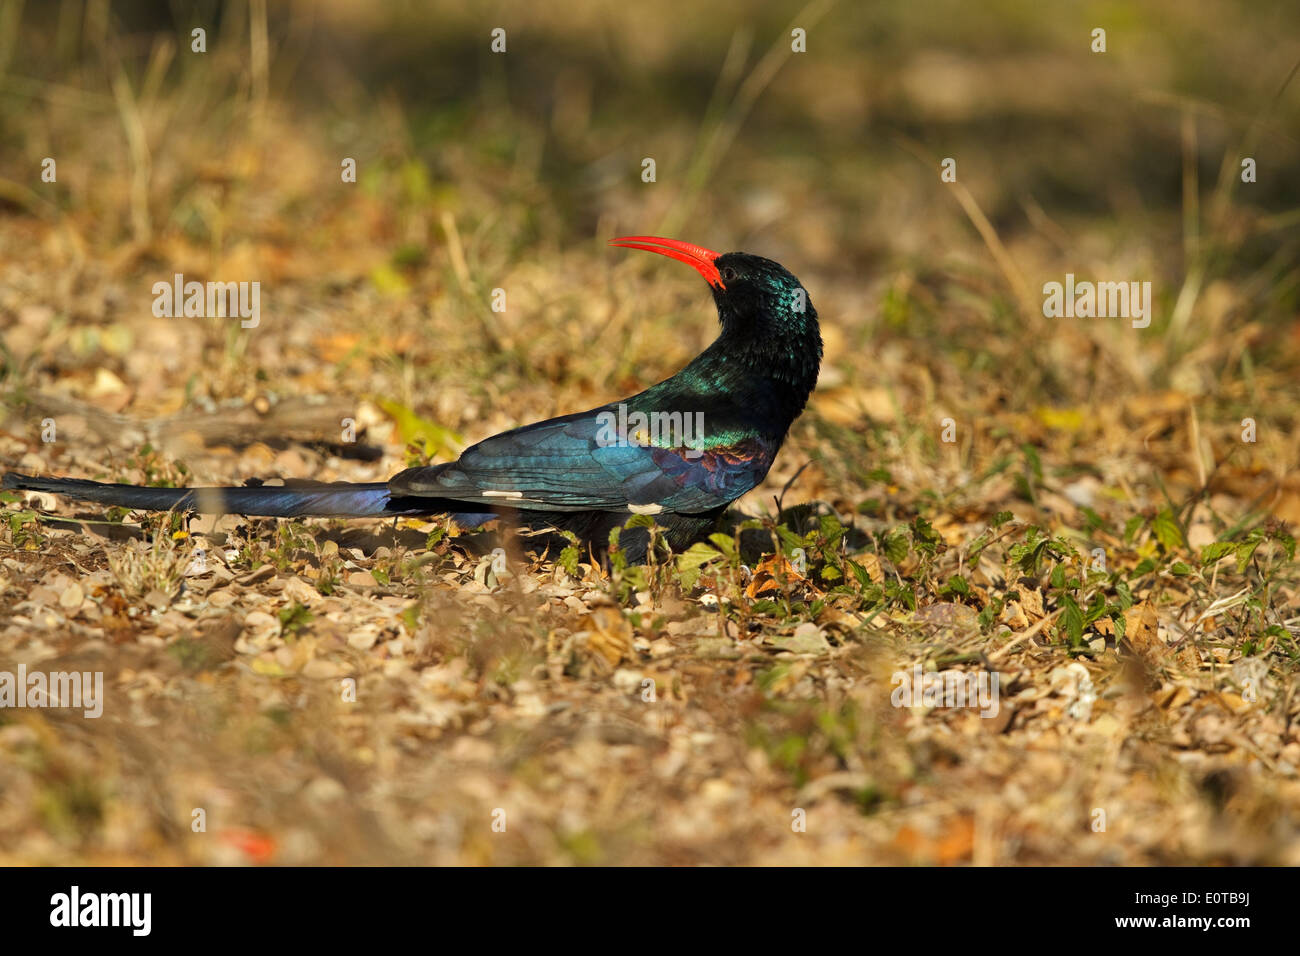 Green Wood Hoopoe (Phoeniculus purpureus marwitzi) on the ground, Kruger National Park, South Africa Stock Photo